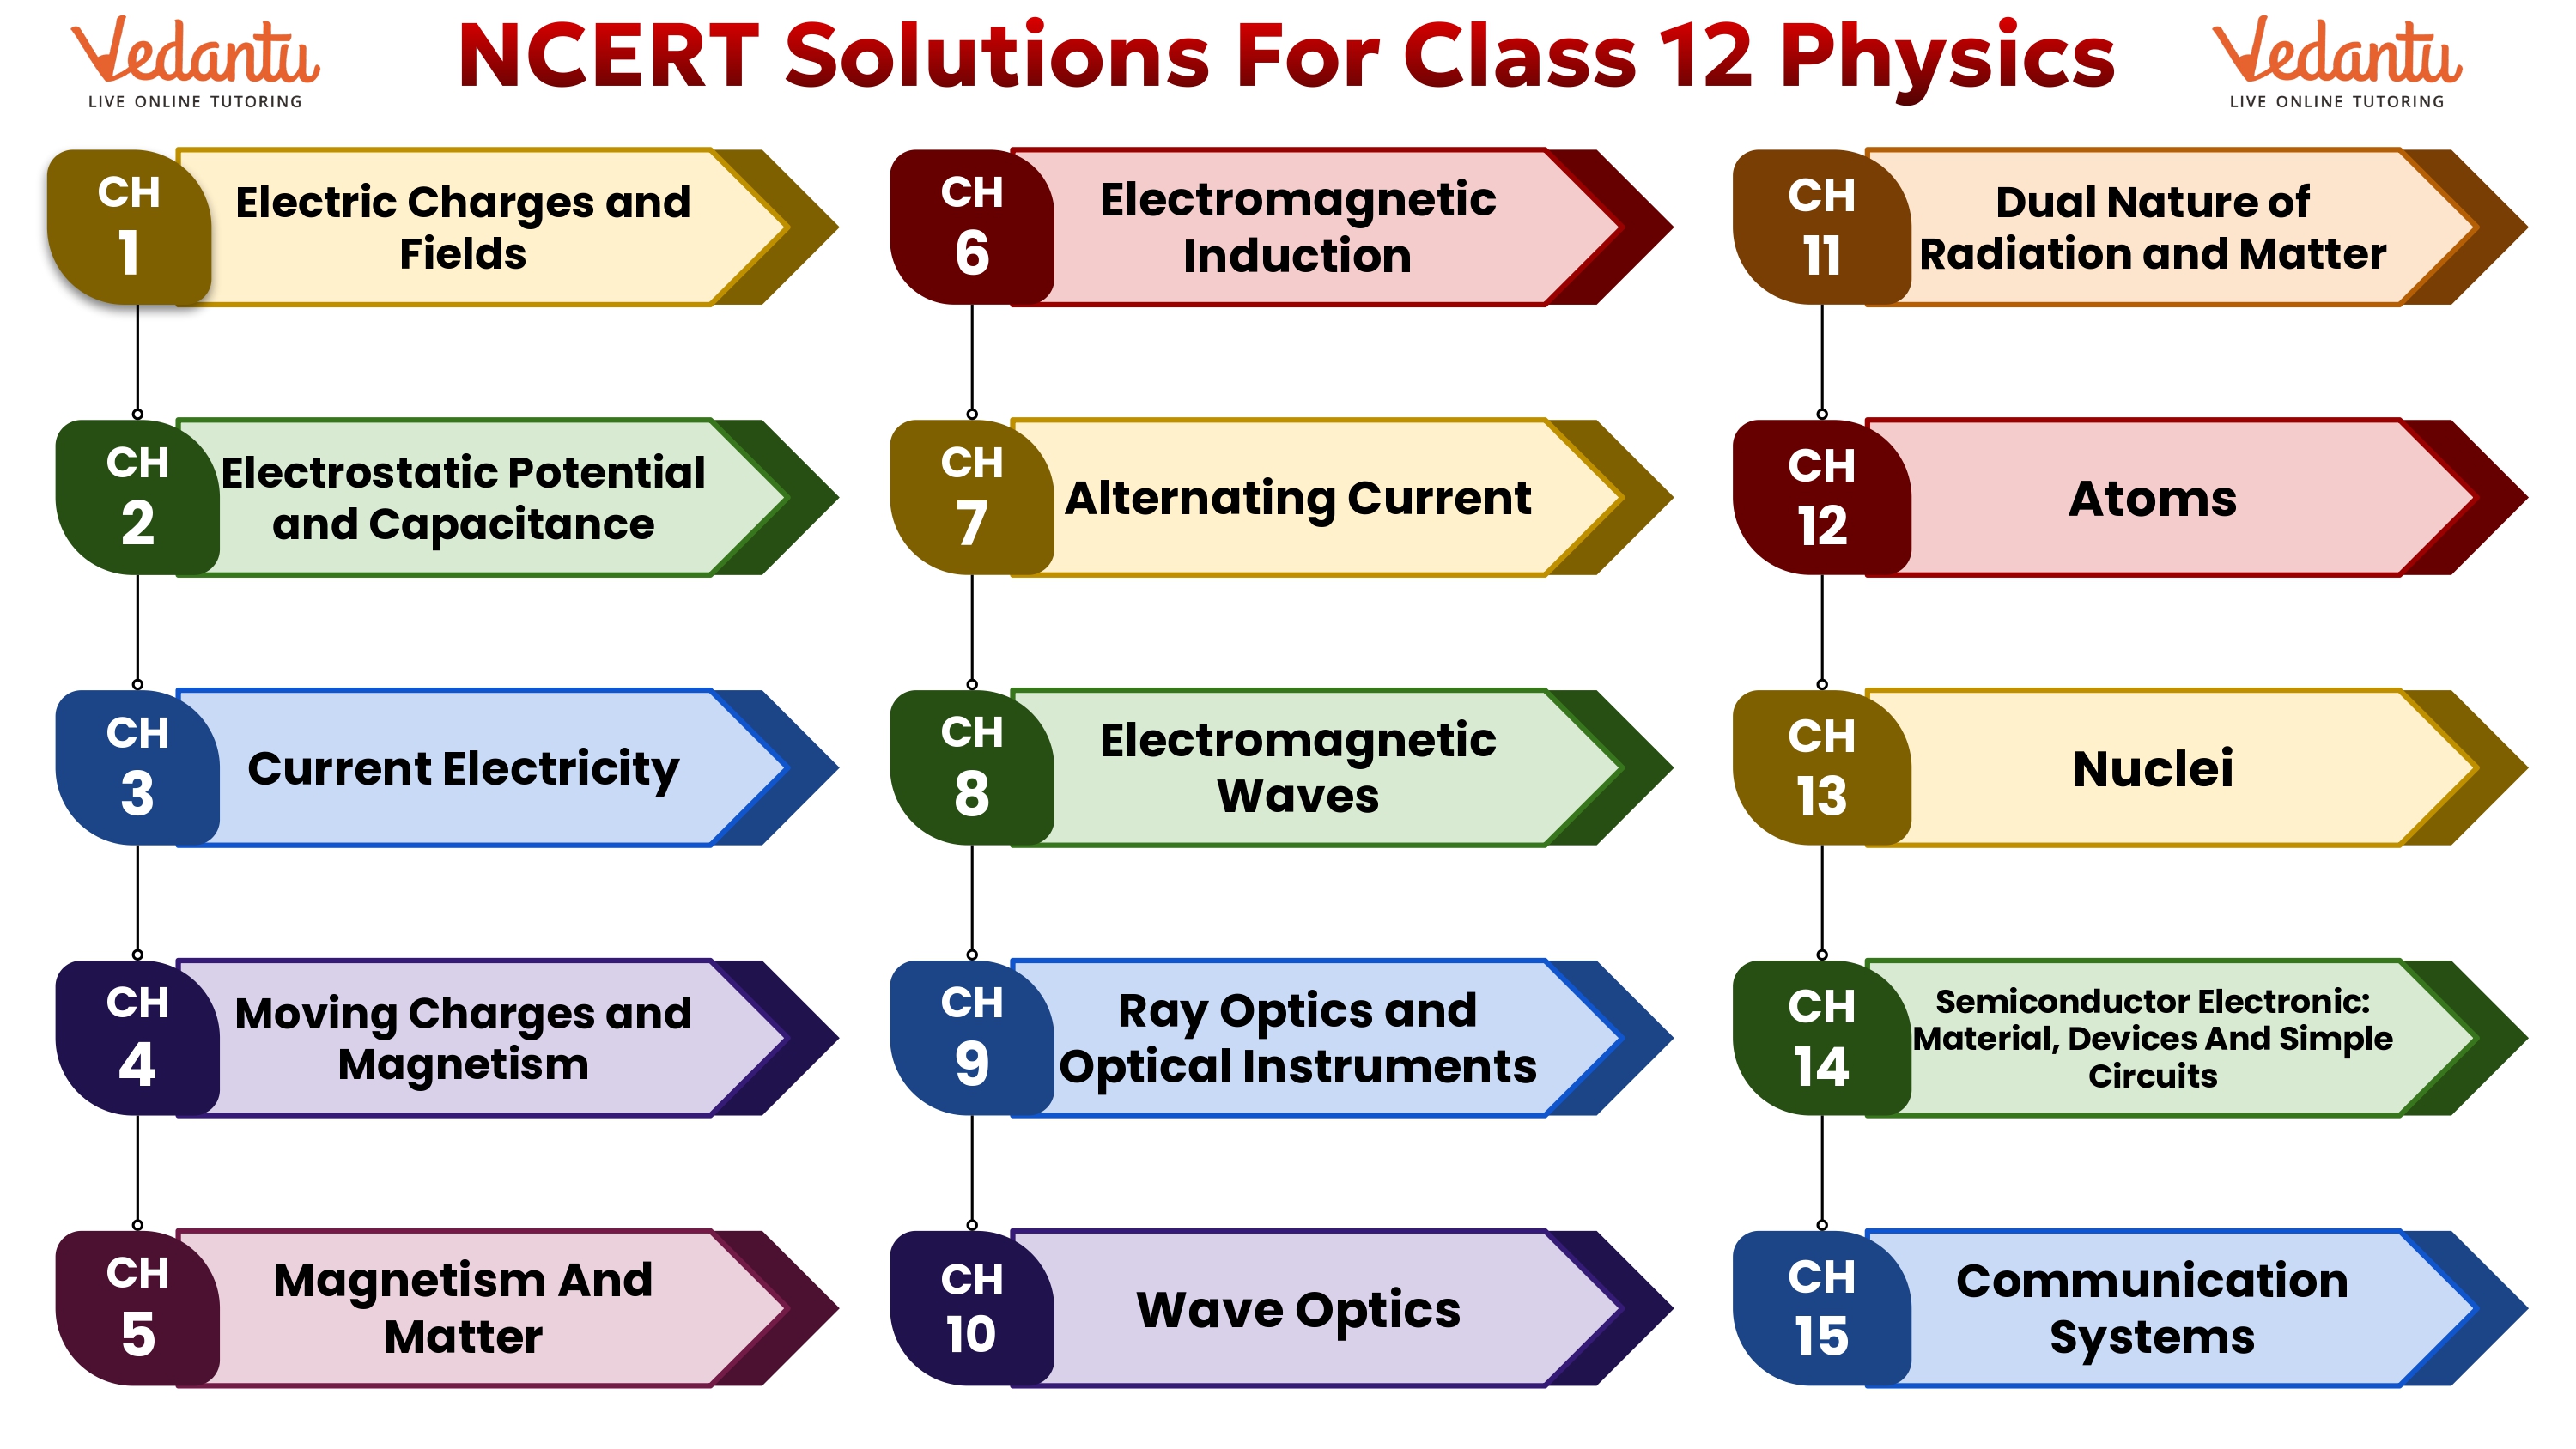 NCERT Solutions For class 12 Physics Chapter-wise List